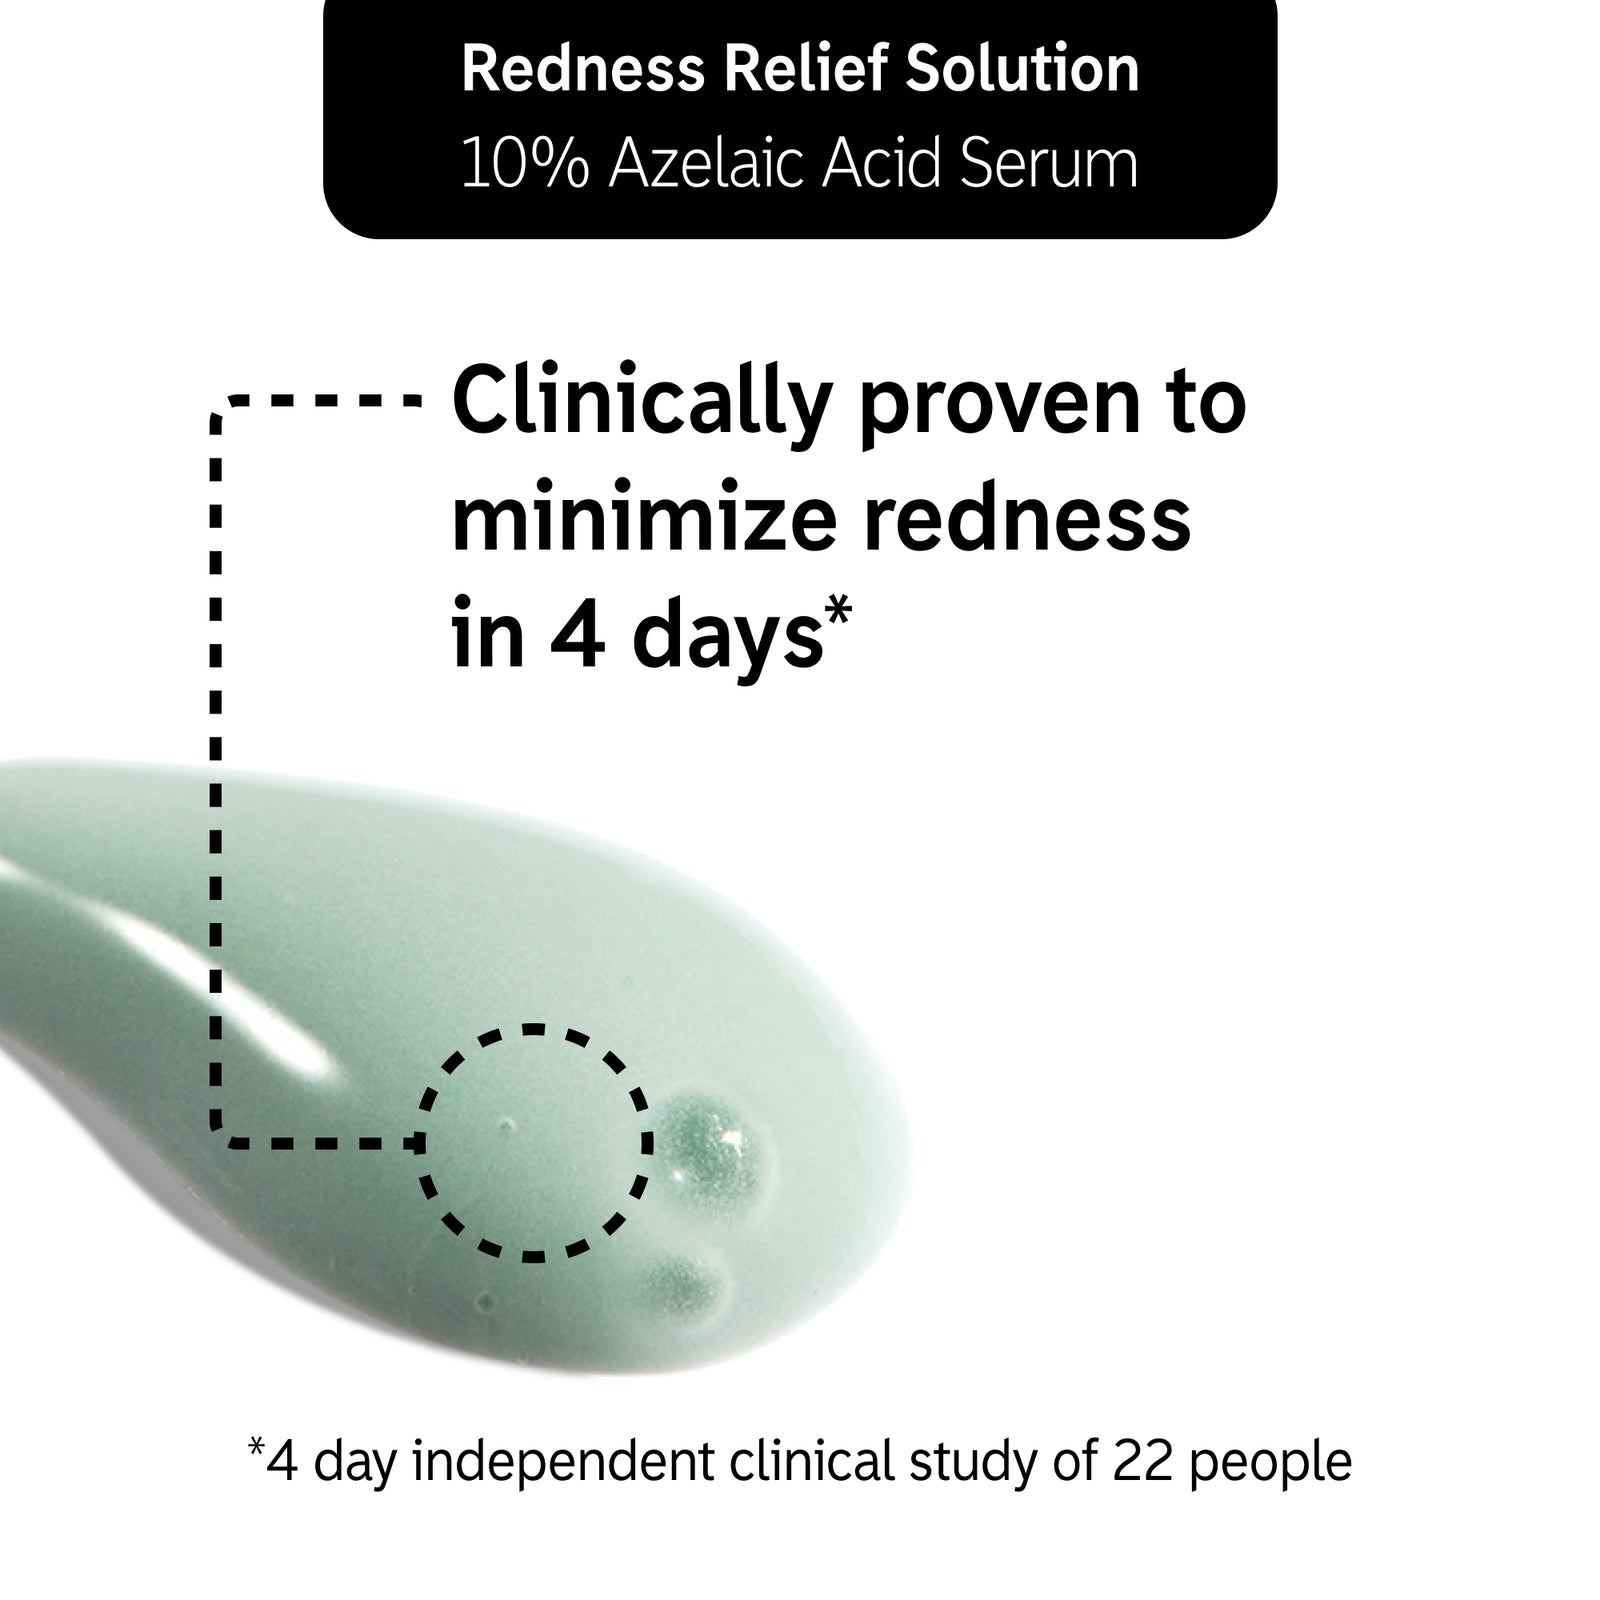 Key claim from clinical trial using Redness Relief Solution for 4 days